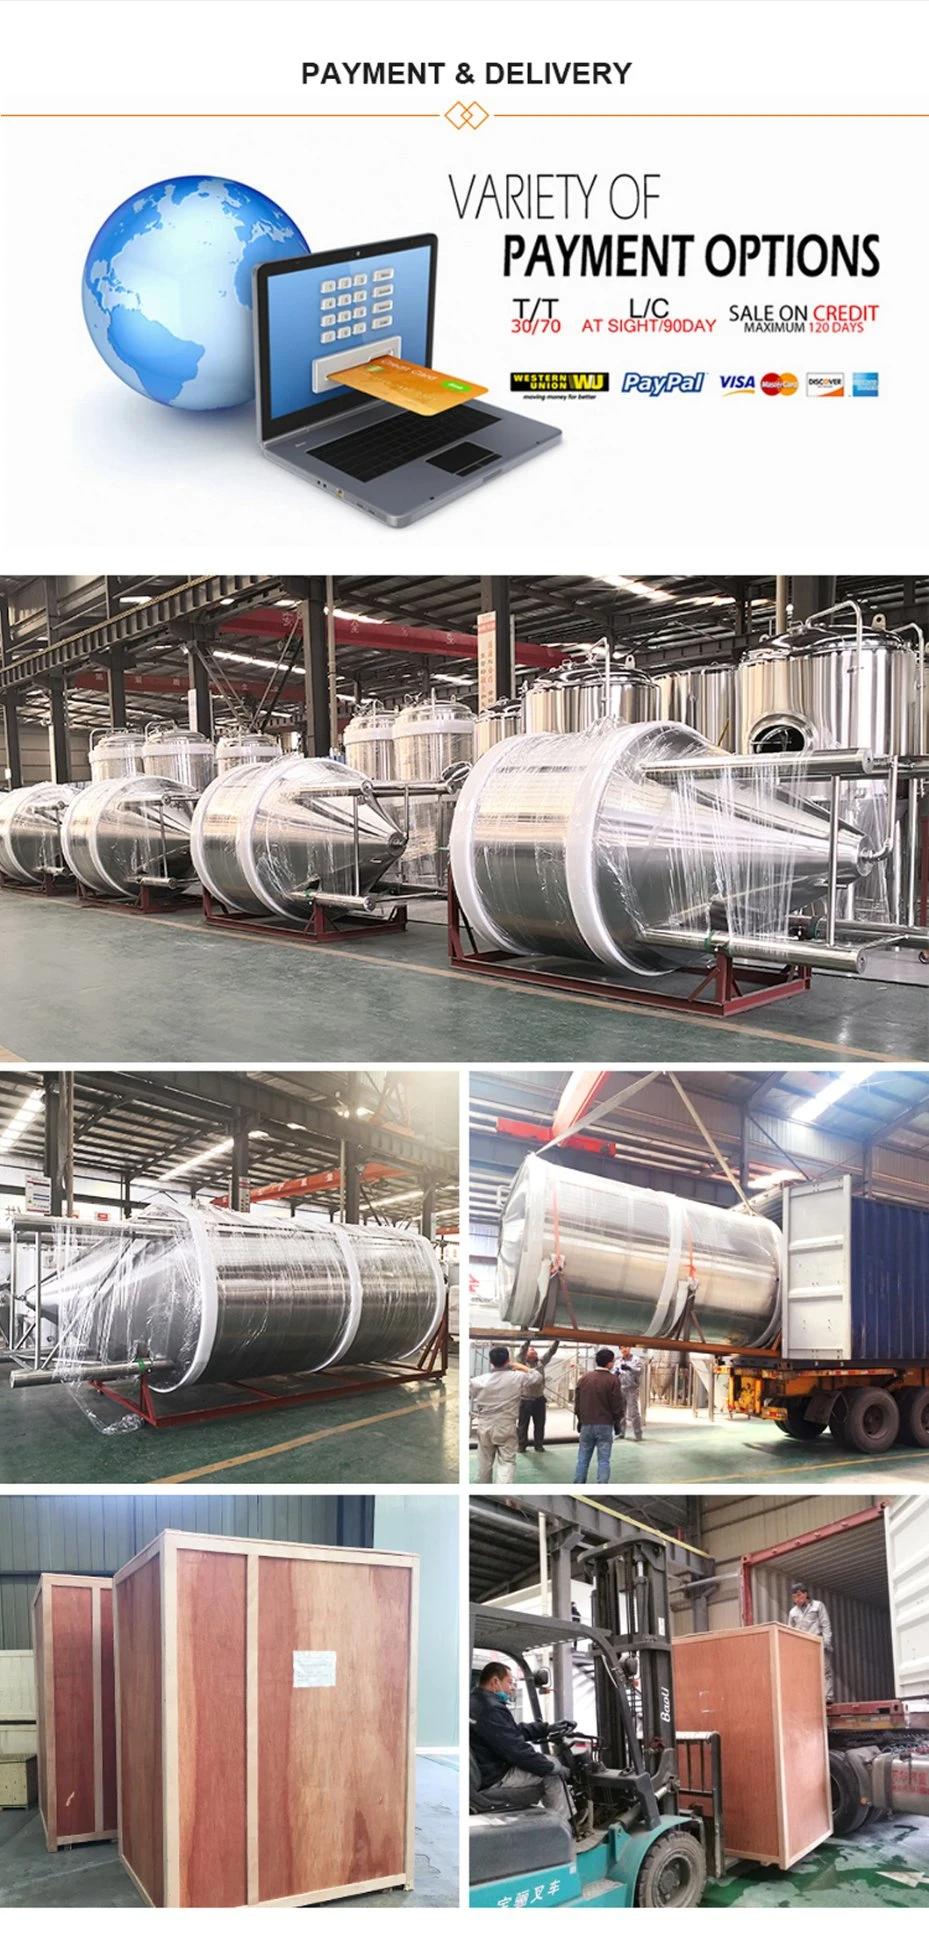 High-Quality and Competitive Price Electric Heating Commercial Process or Industrial Process 300L 500L 1000L Beer Brewing Equipment for Brewery